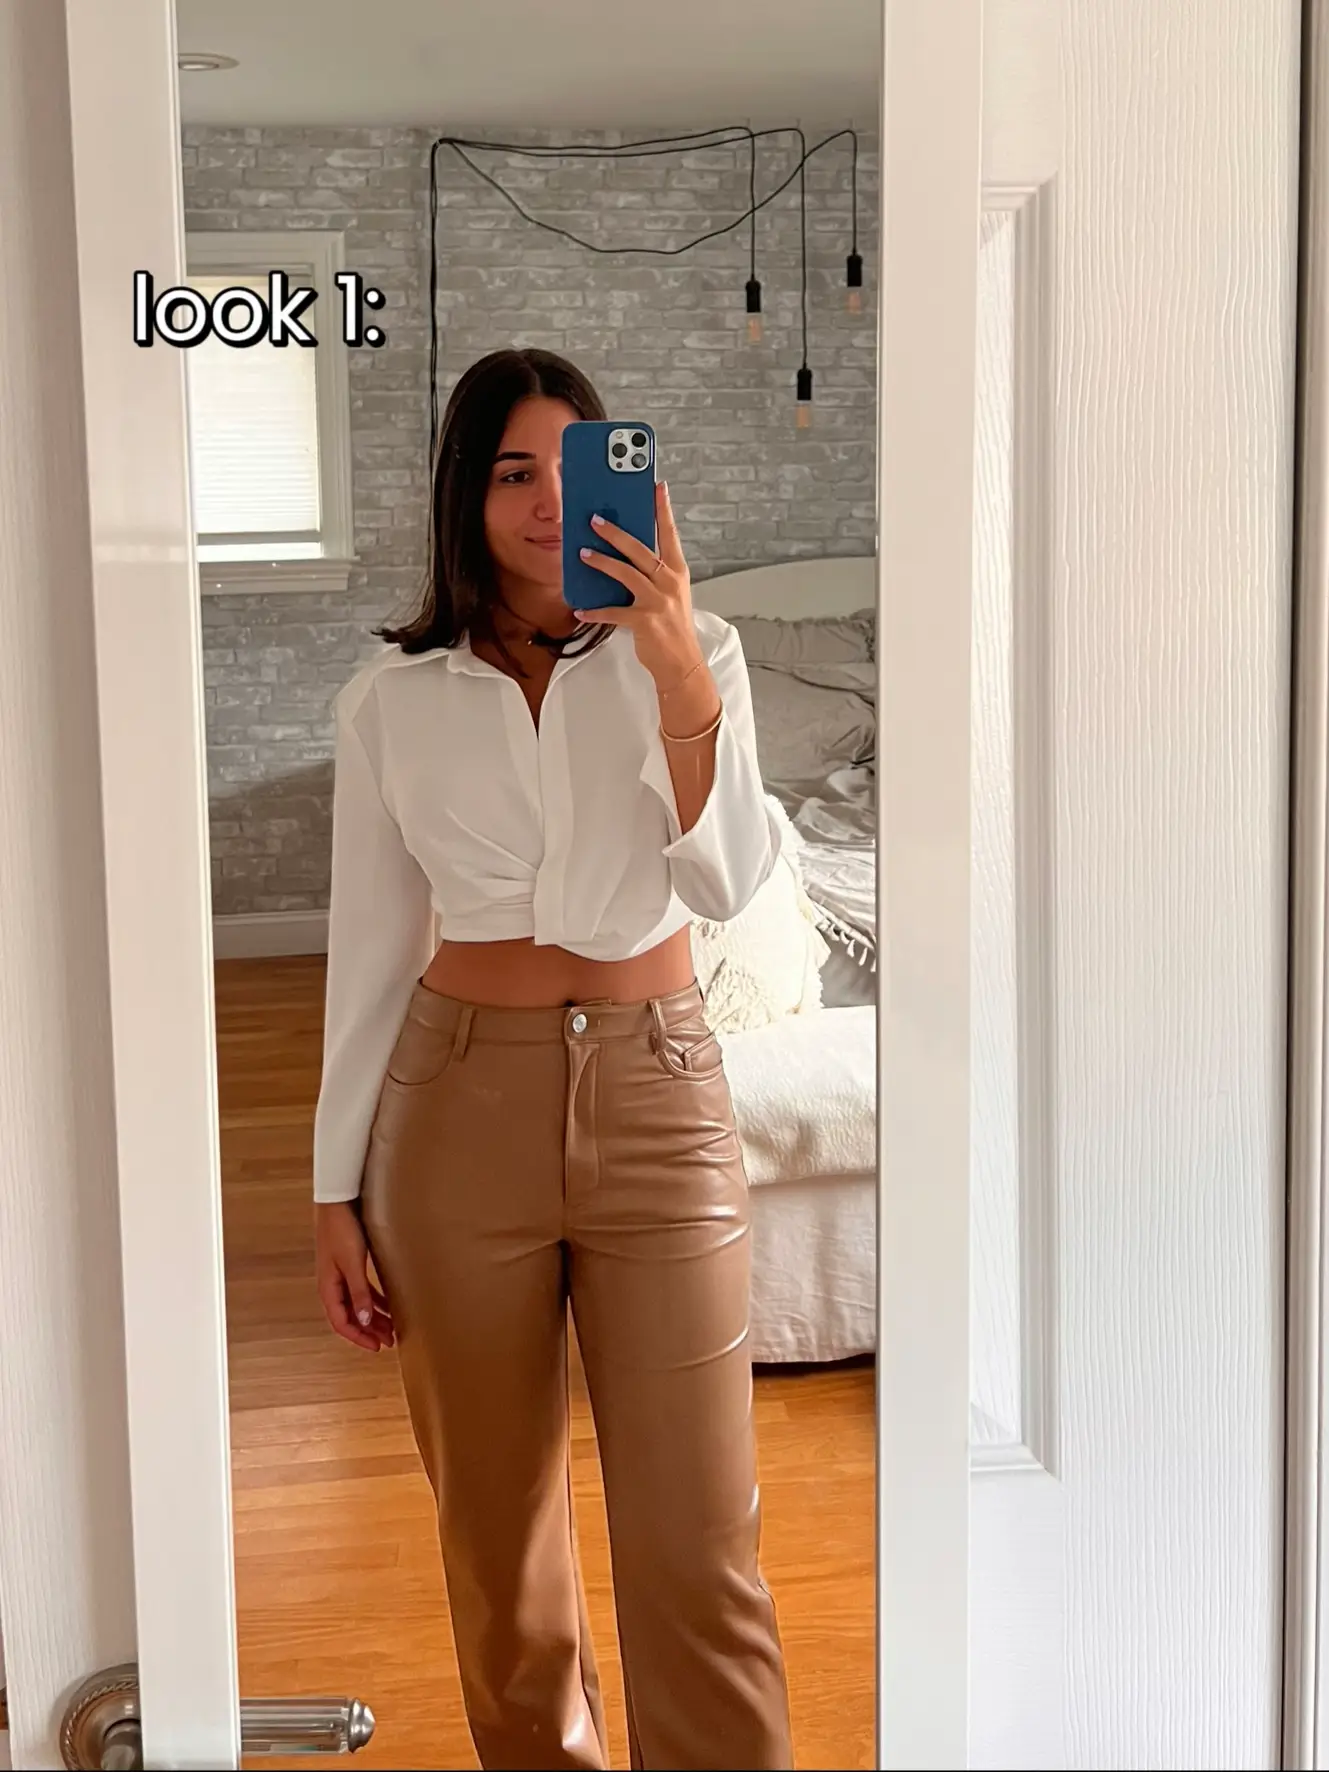 First time Aritzia buyer here & wow I'm addicted now. I put together this  outfit and I'm LOVING IT!! Wearing Melina Pant Tall (10) in constant camel  with the Babaton Canberra Cardigan (